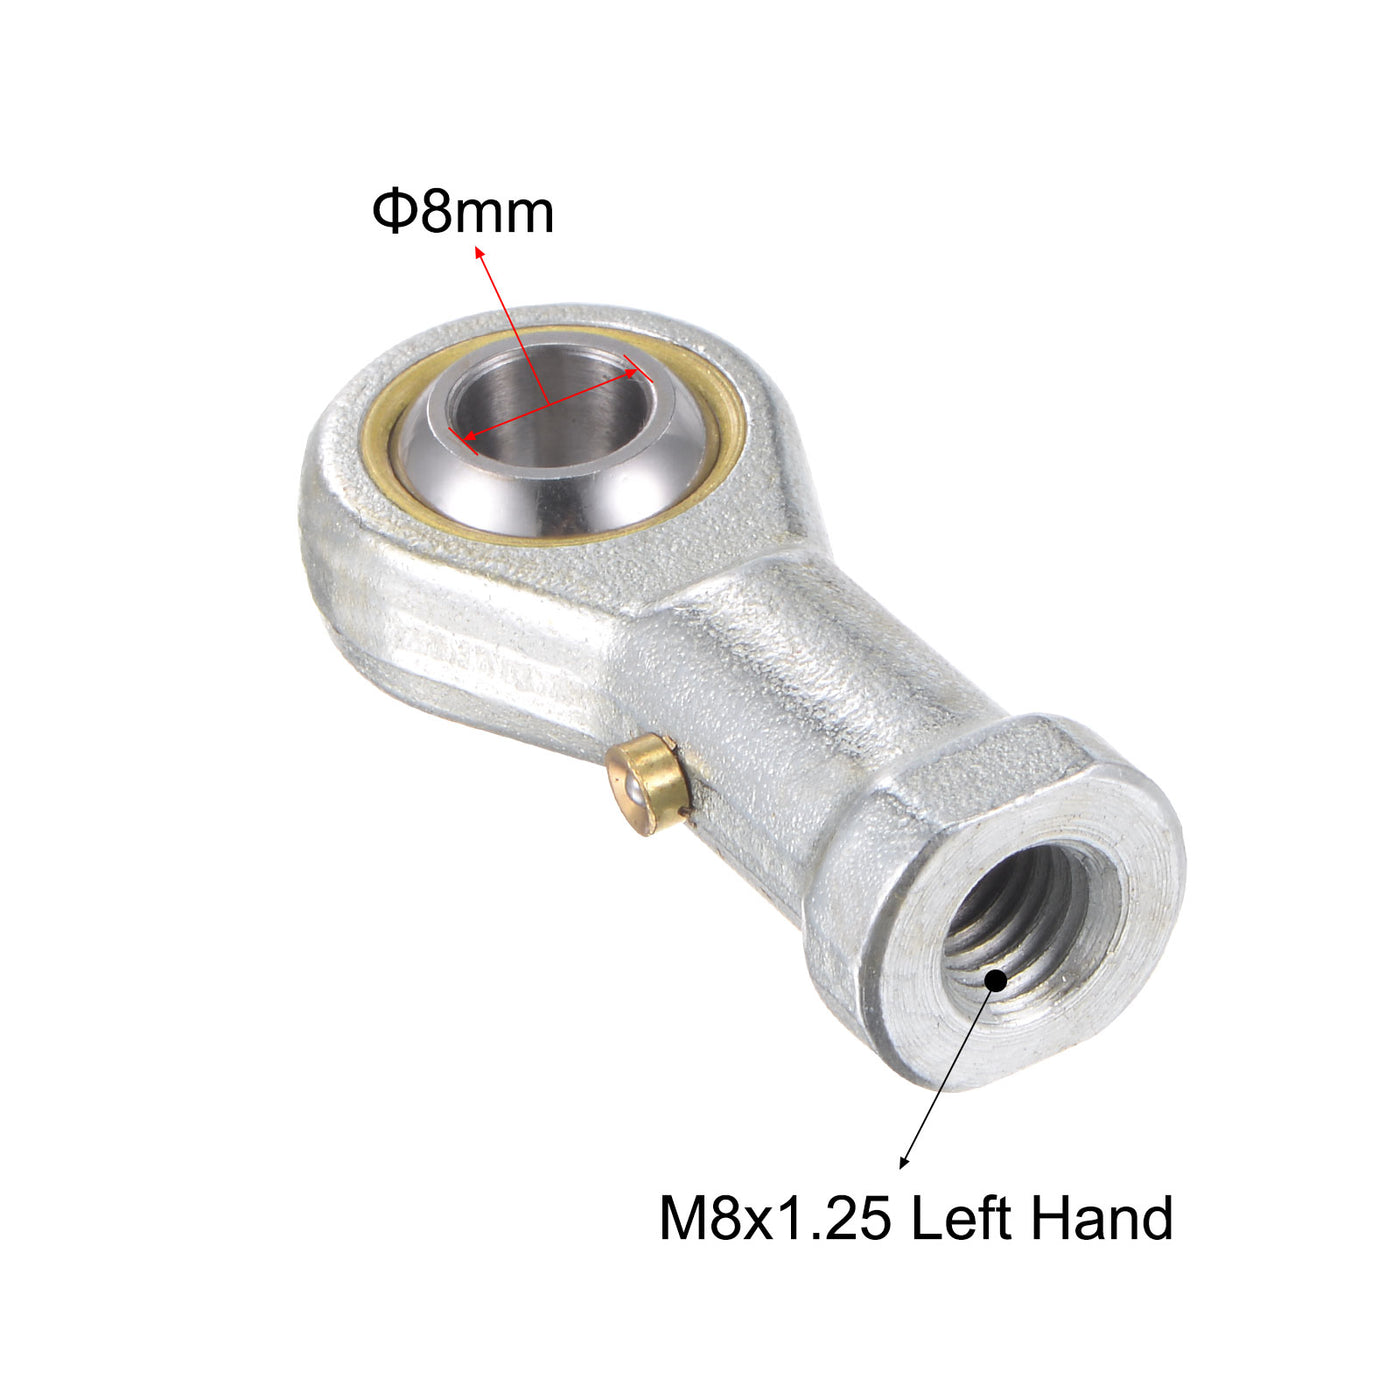 uxcell Uxcell PHS8 Rod End Bearing 8mm Bore Self-lubricated M8x1.25 Left Hand Female Thread